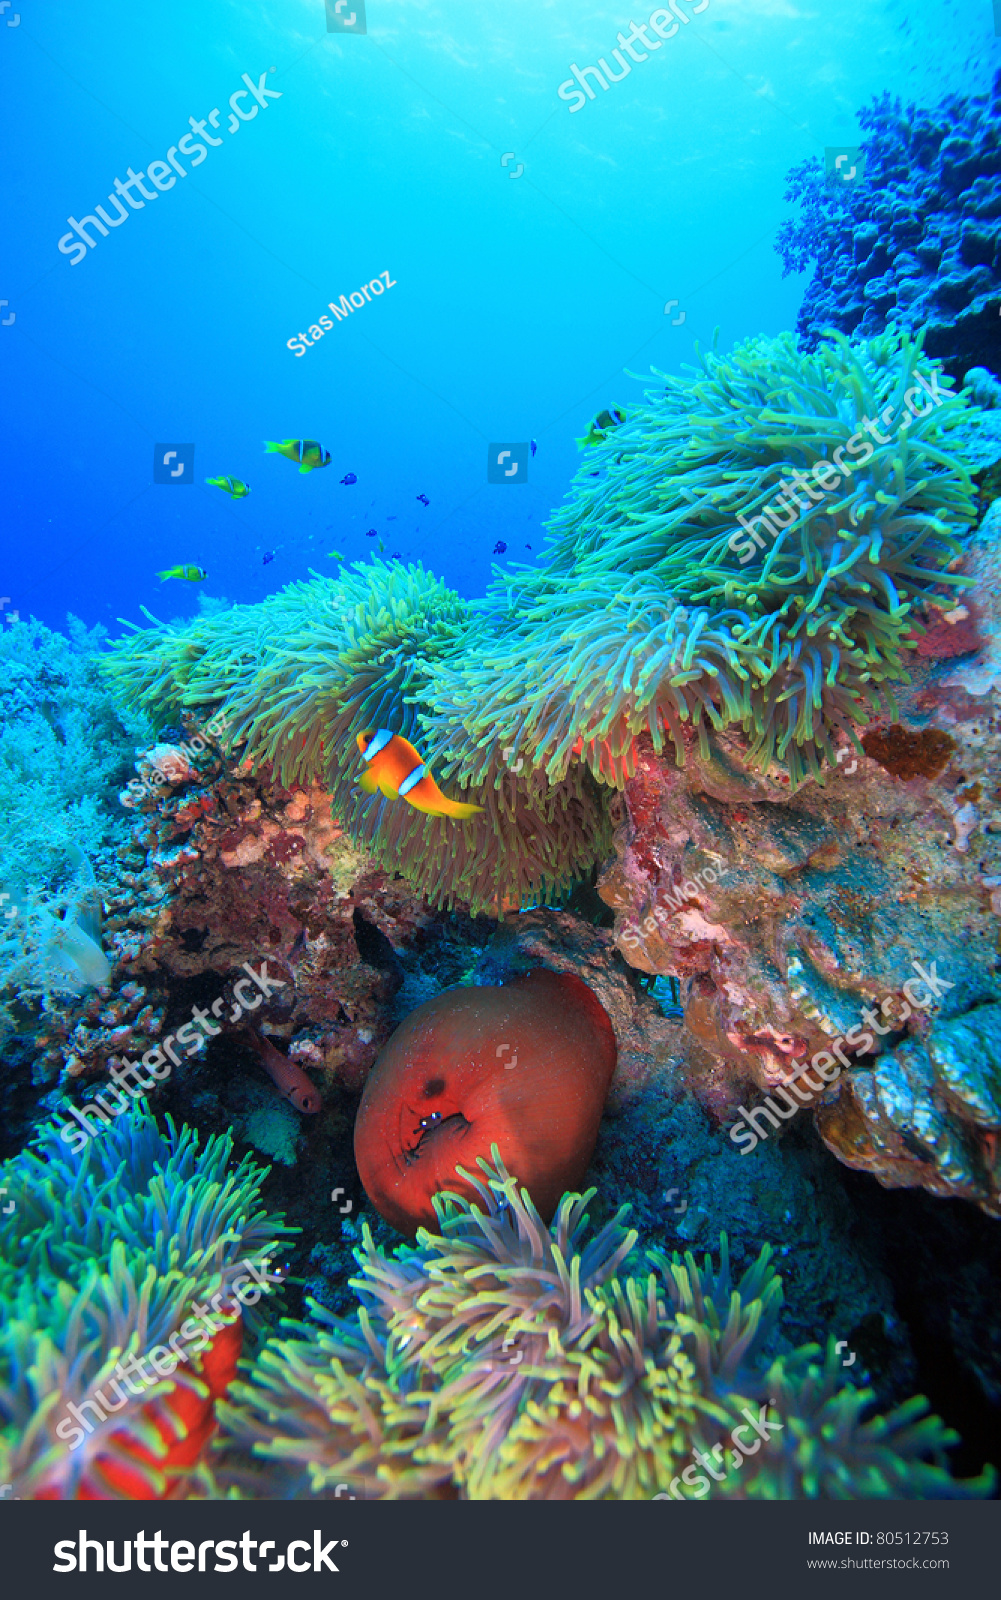 Marine Life In The Red Sea Stock Photo 80512753 : Shutterstock